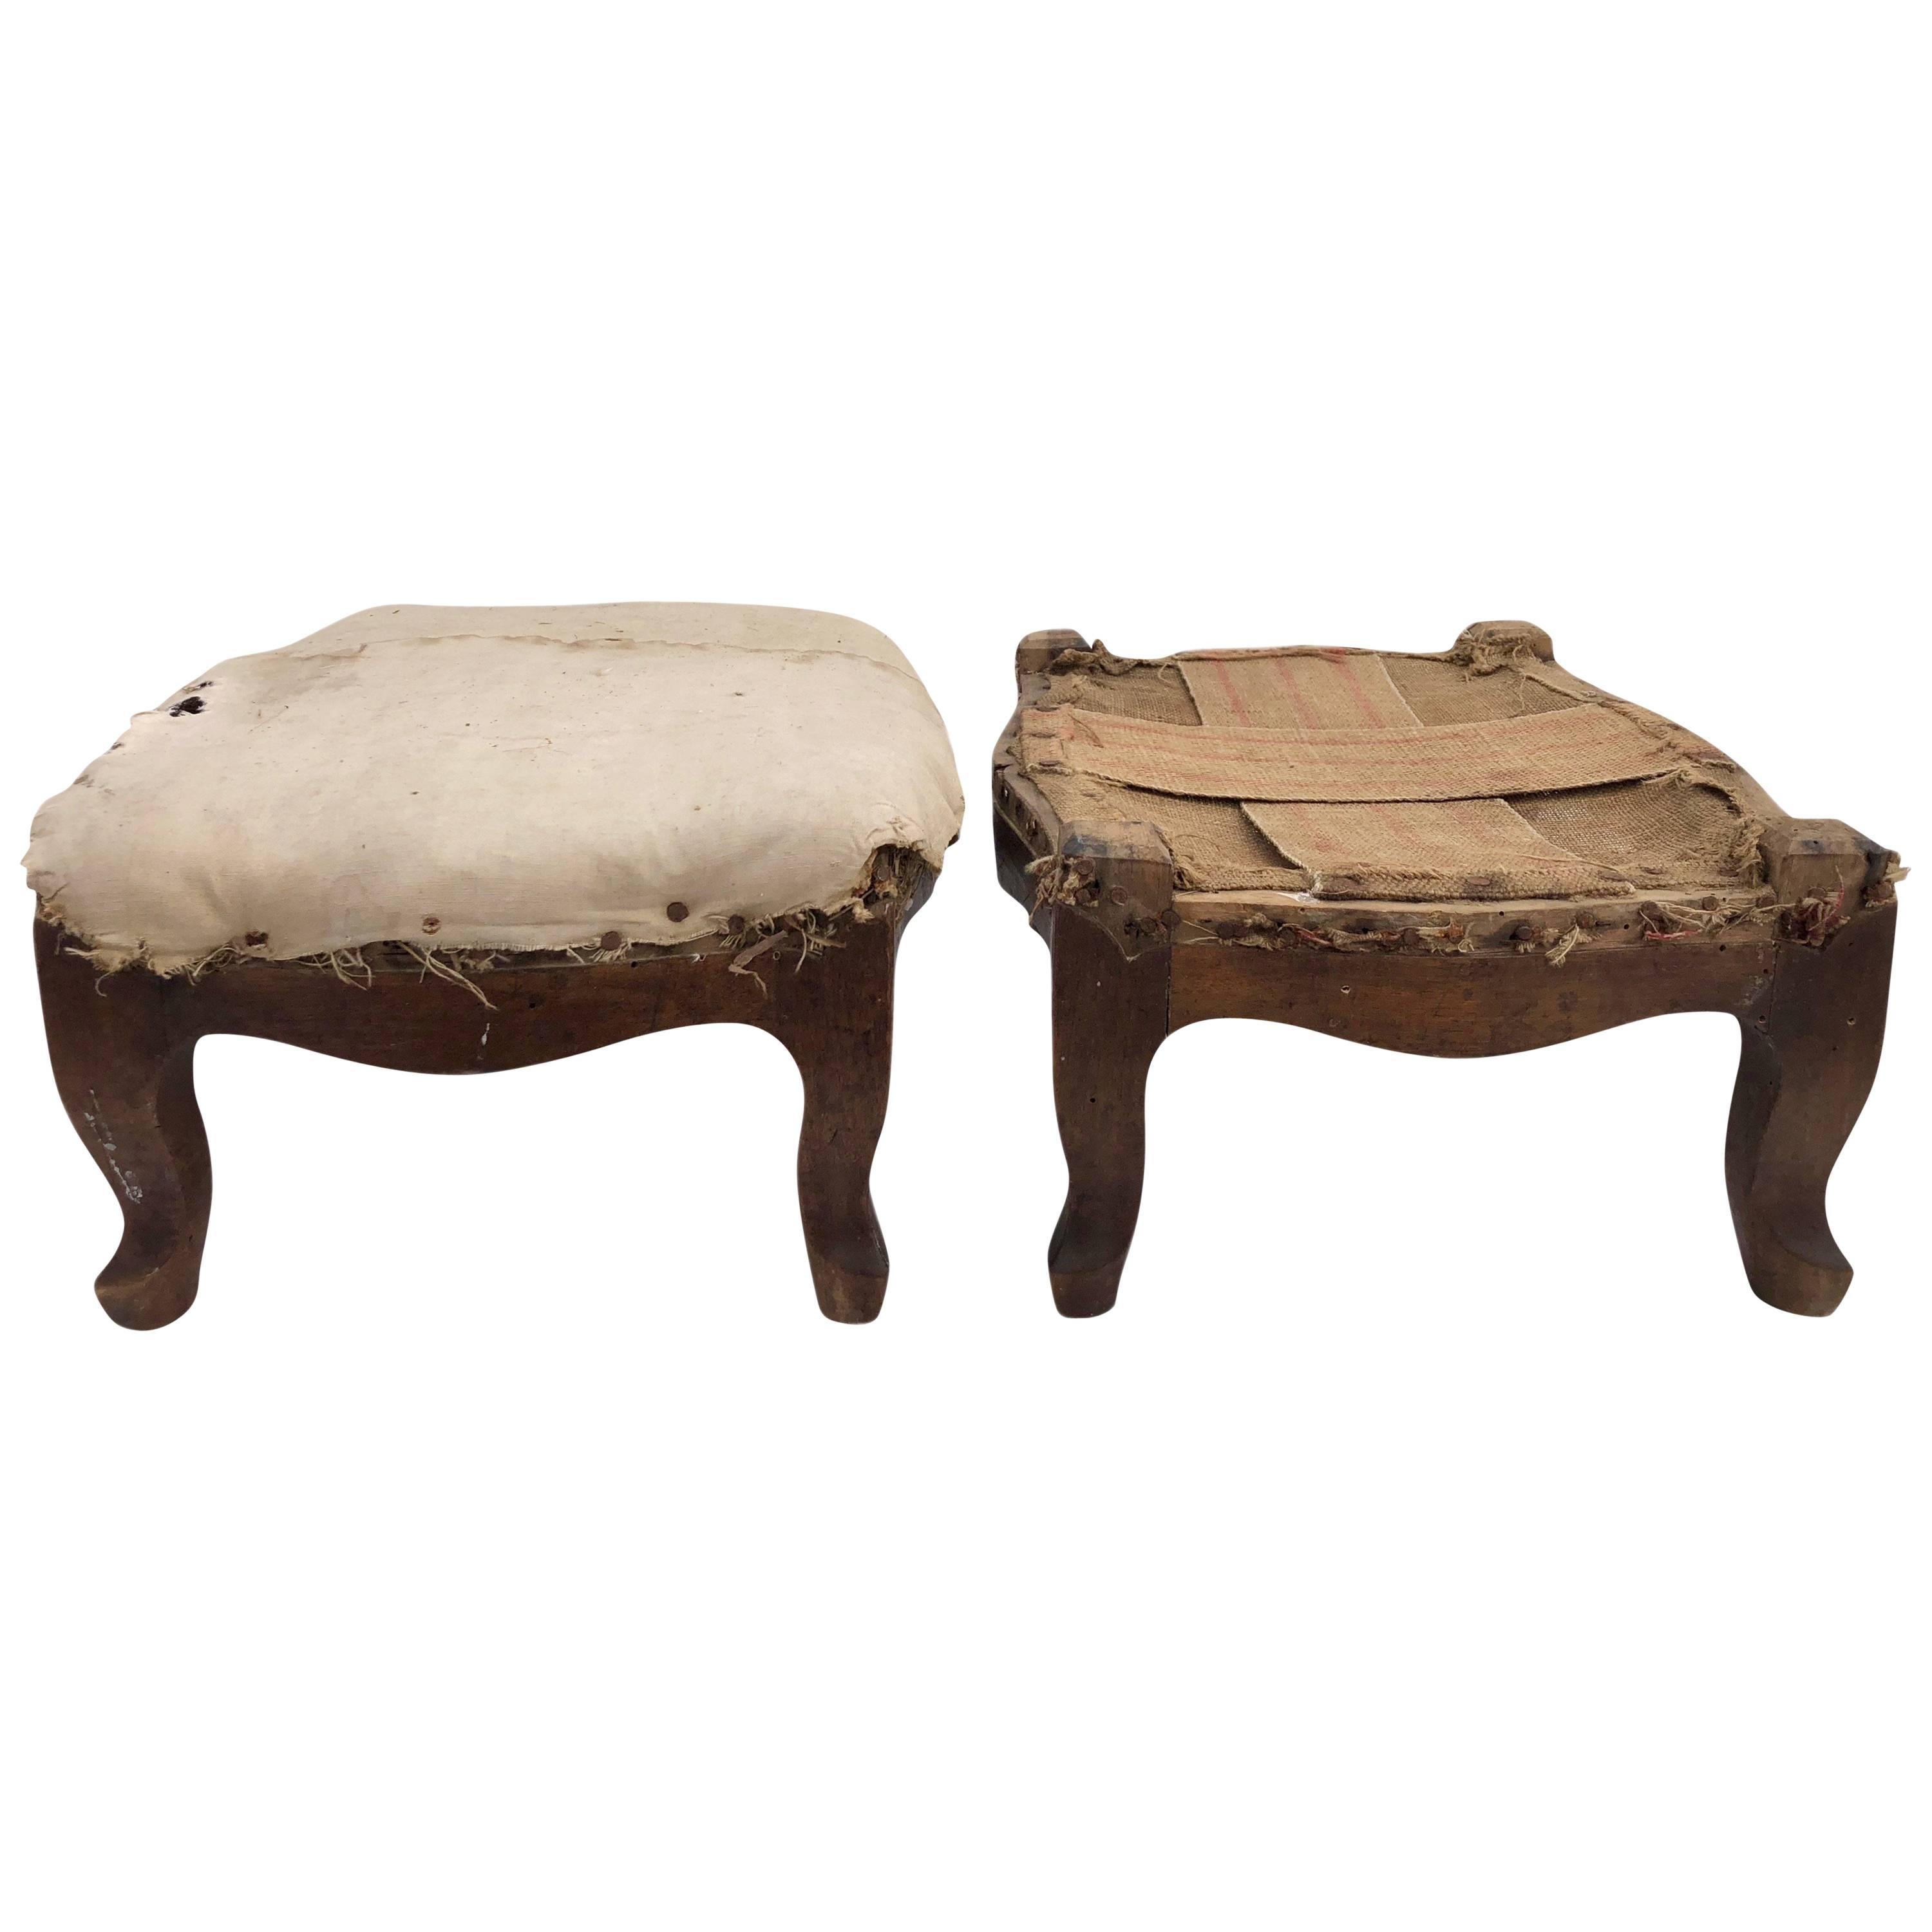 Pair of Wooden French Régence Footstools Stuffed with Straw, Early 1800s For Sale